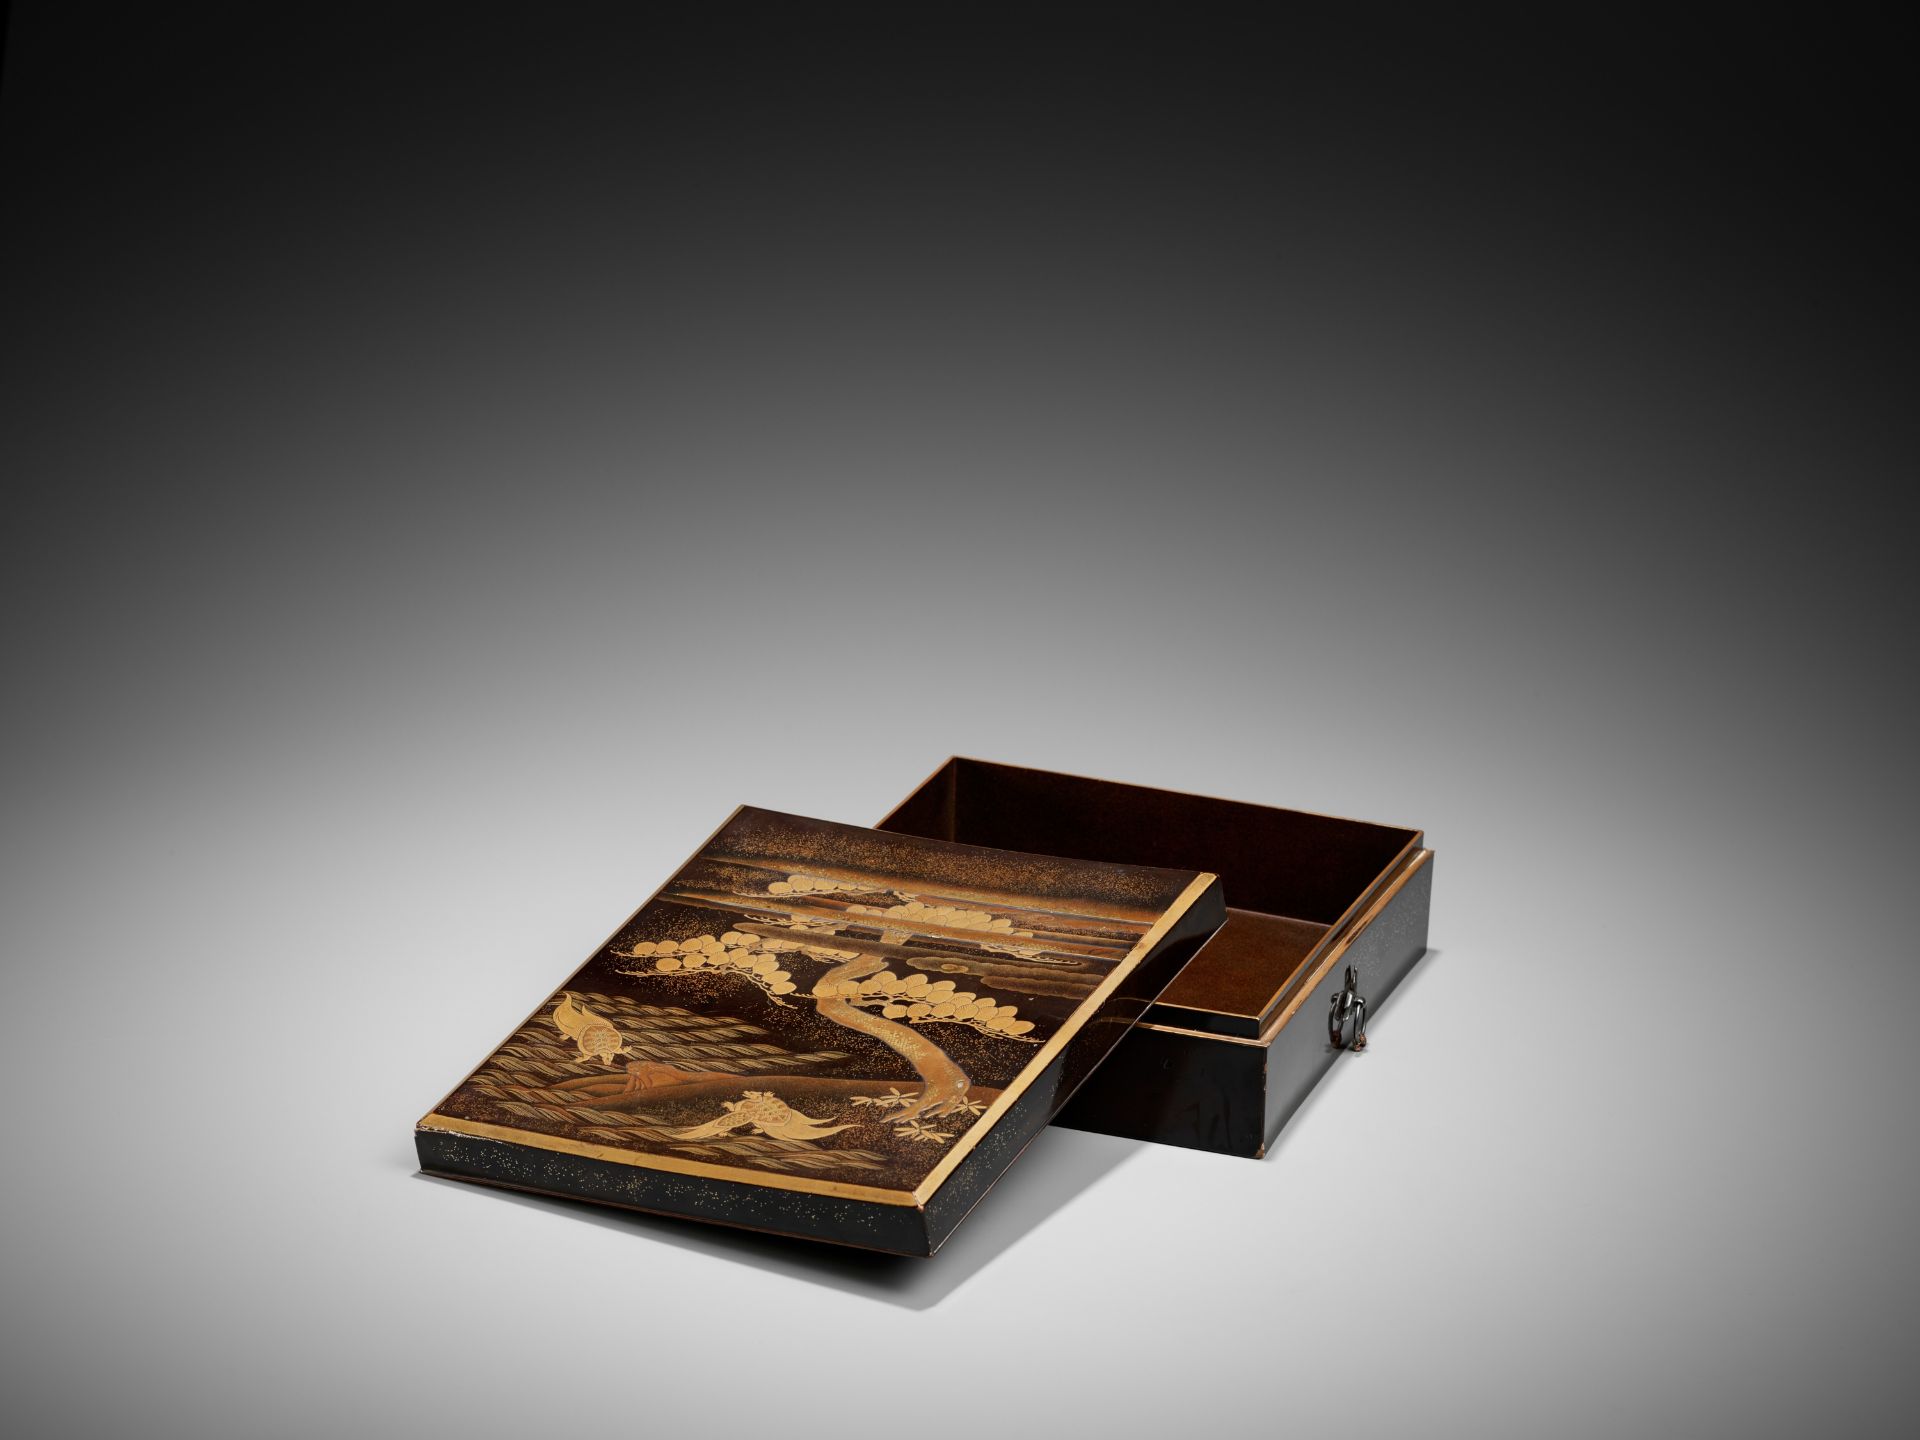 A LACQUER BOX AND COVER WITH MINOGAME DESIGN - Image 10 of 10